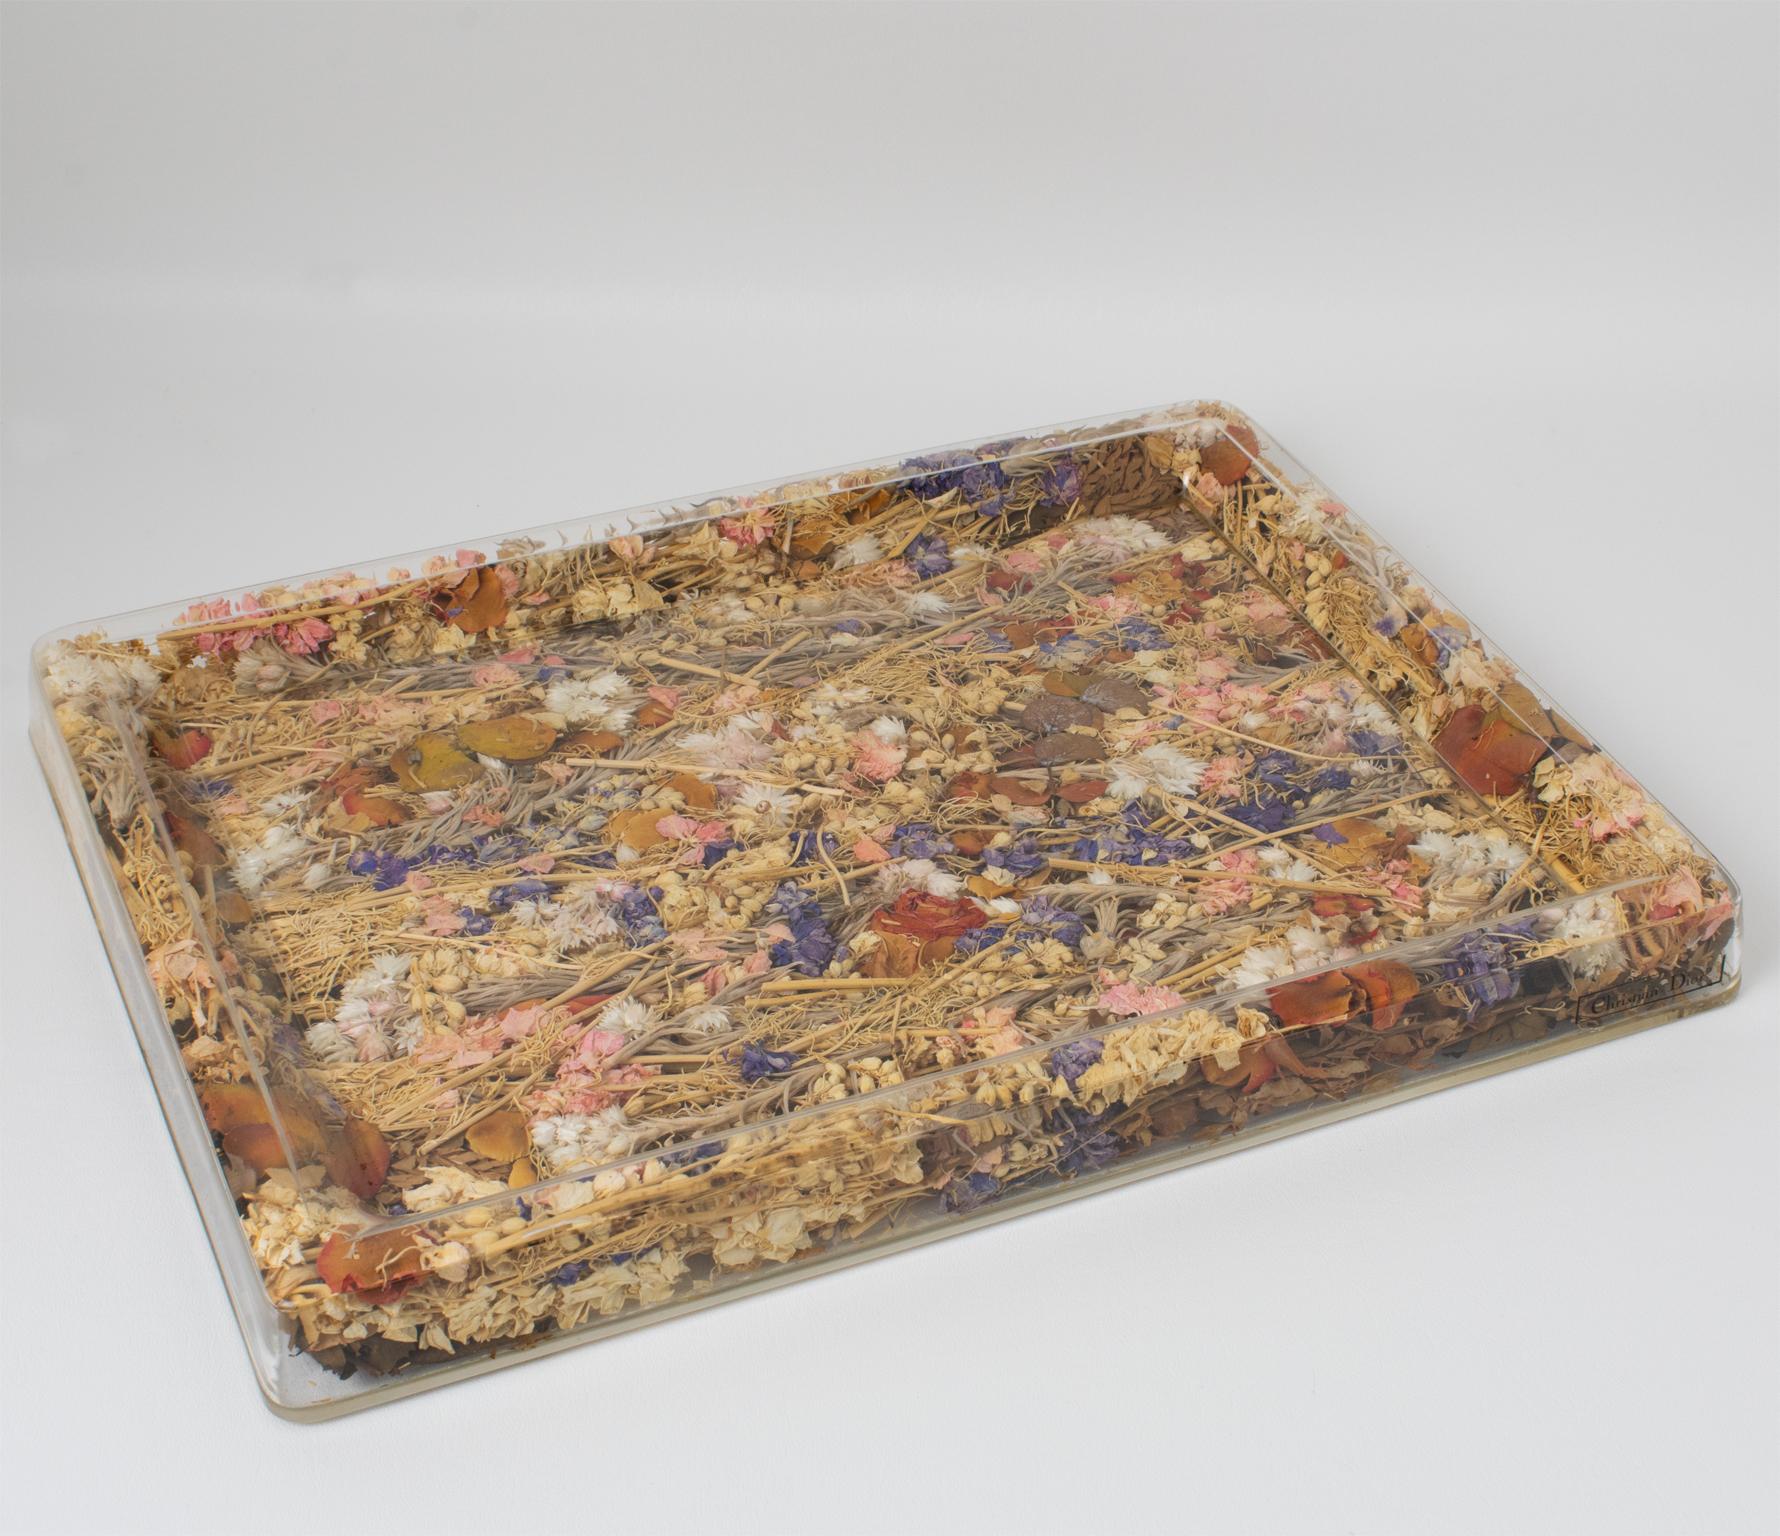 This special serving tray is a Christian Dior design from the 1970s Home Collection. This board or platter has a rectangular shape with raised edges. This barware or serveware accessory is of clear Lucite or plexiglass with genuine multicolor dried